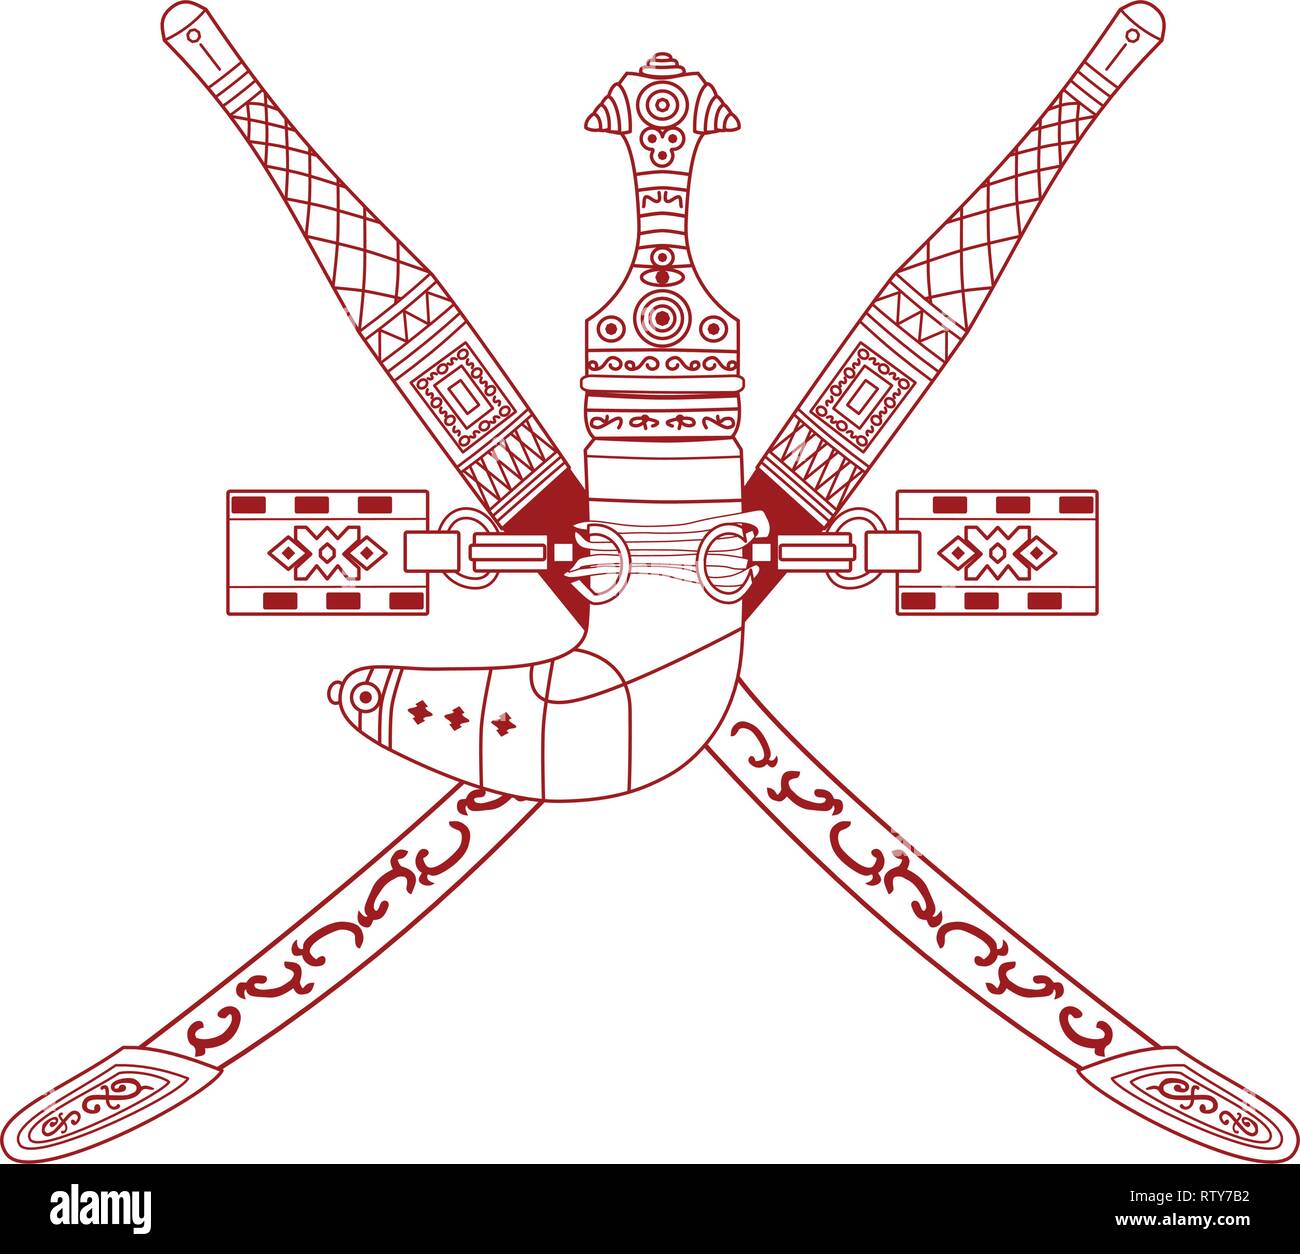 National emblem of Oman (Coat of Arms)  Khanjar dagger and two crossed swords. Stock Vector